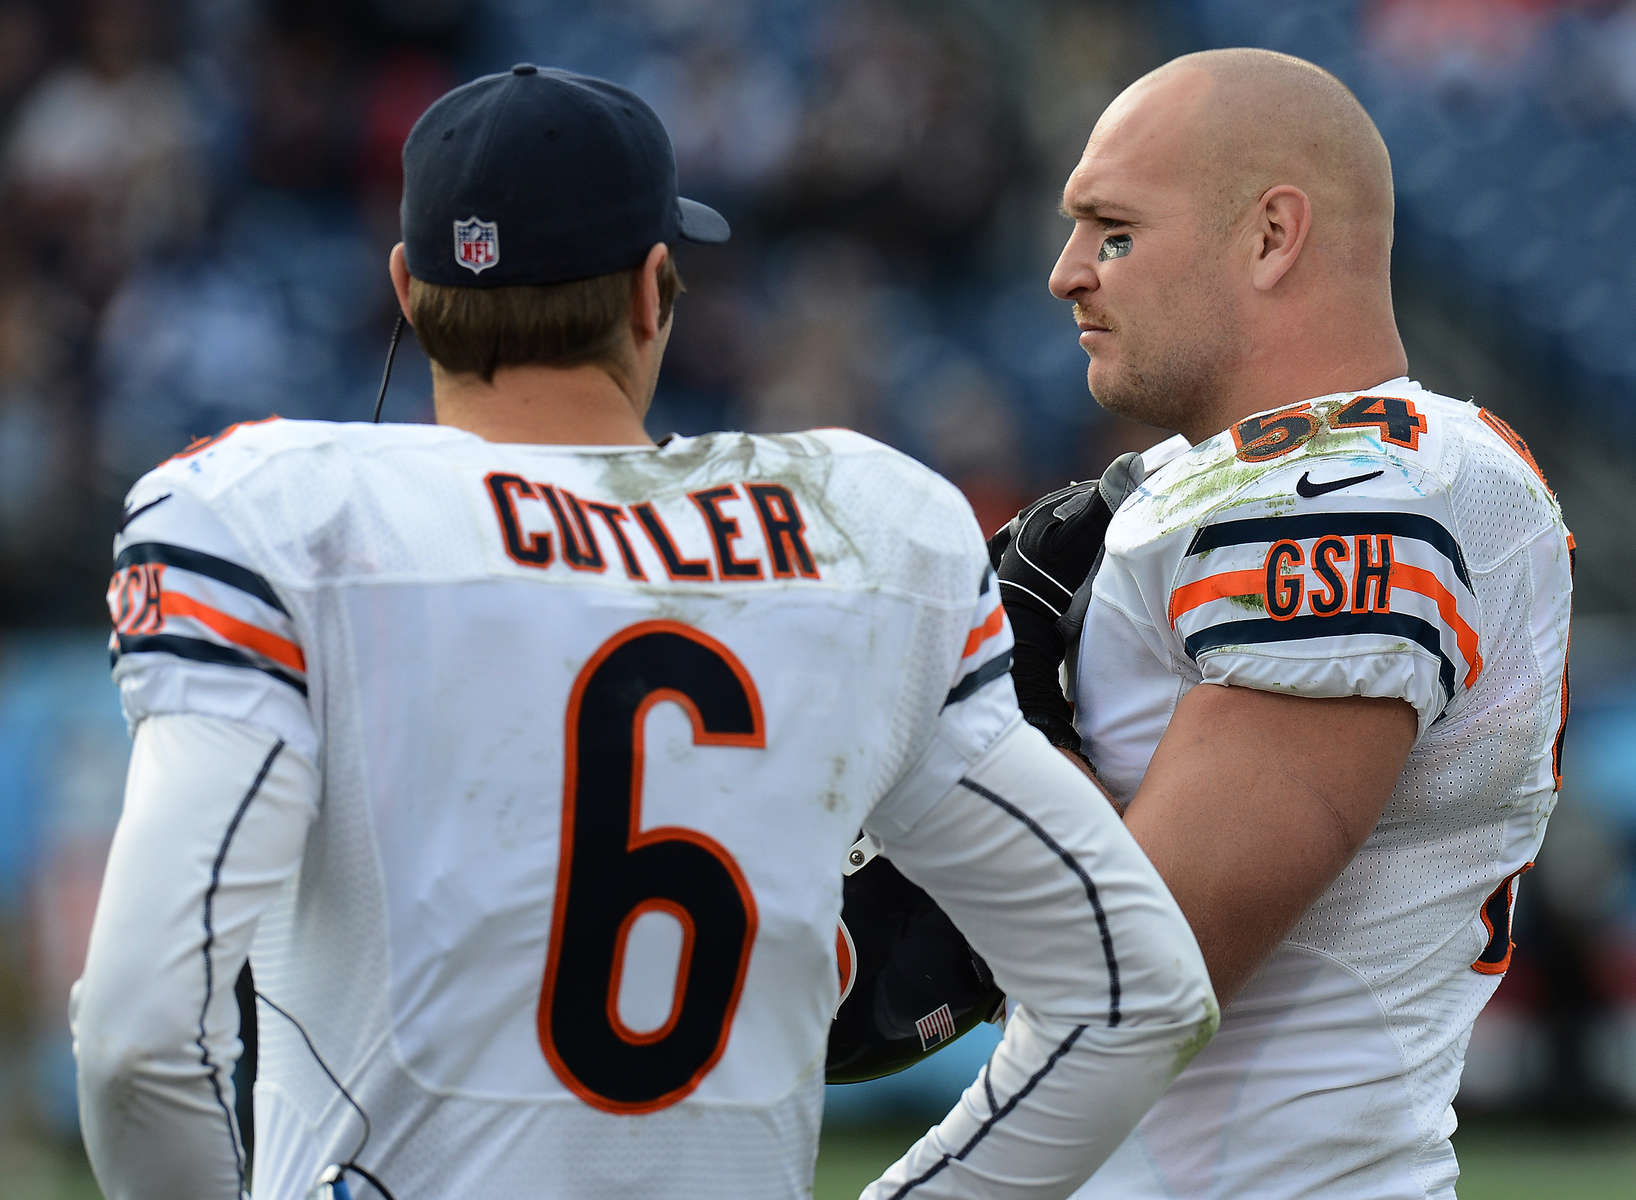 Chicago Bears quarterback Jay Cutler and middlelinebacker Brian Urlacher talk on the sidelines during a game against the Tennessee Titans on Nov. 4, 2012 in Nashville, Tenn. (The Tennessean/ Mark Zaleski)